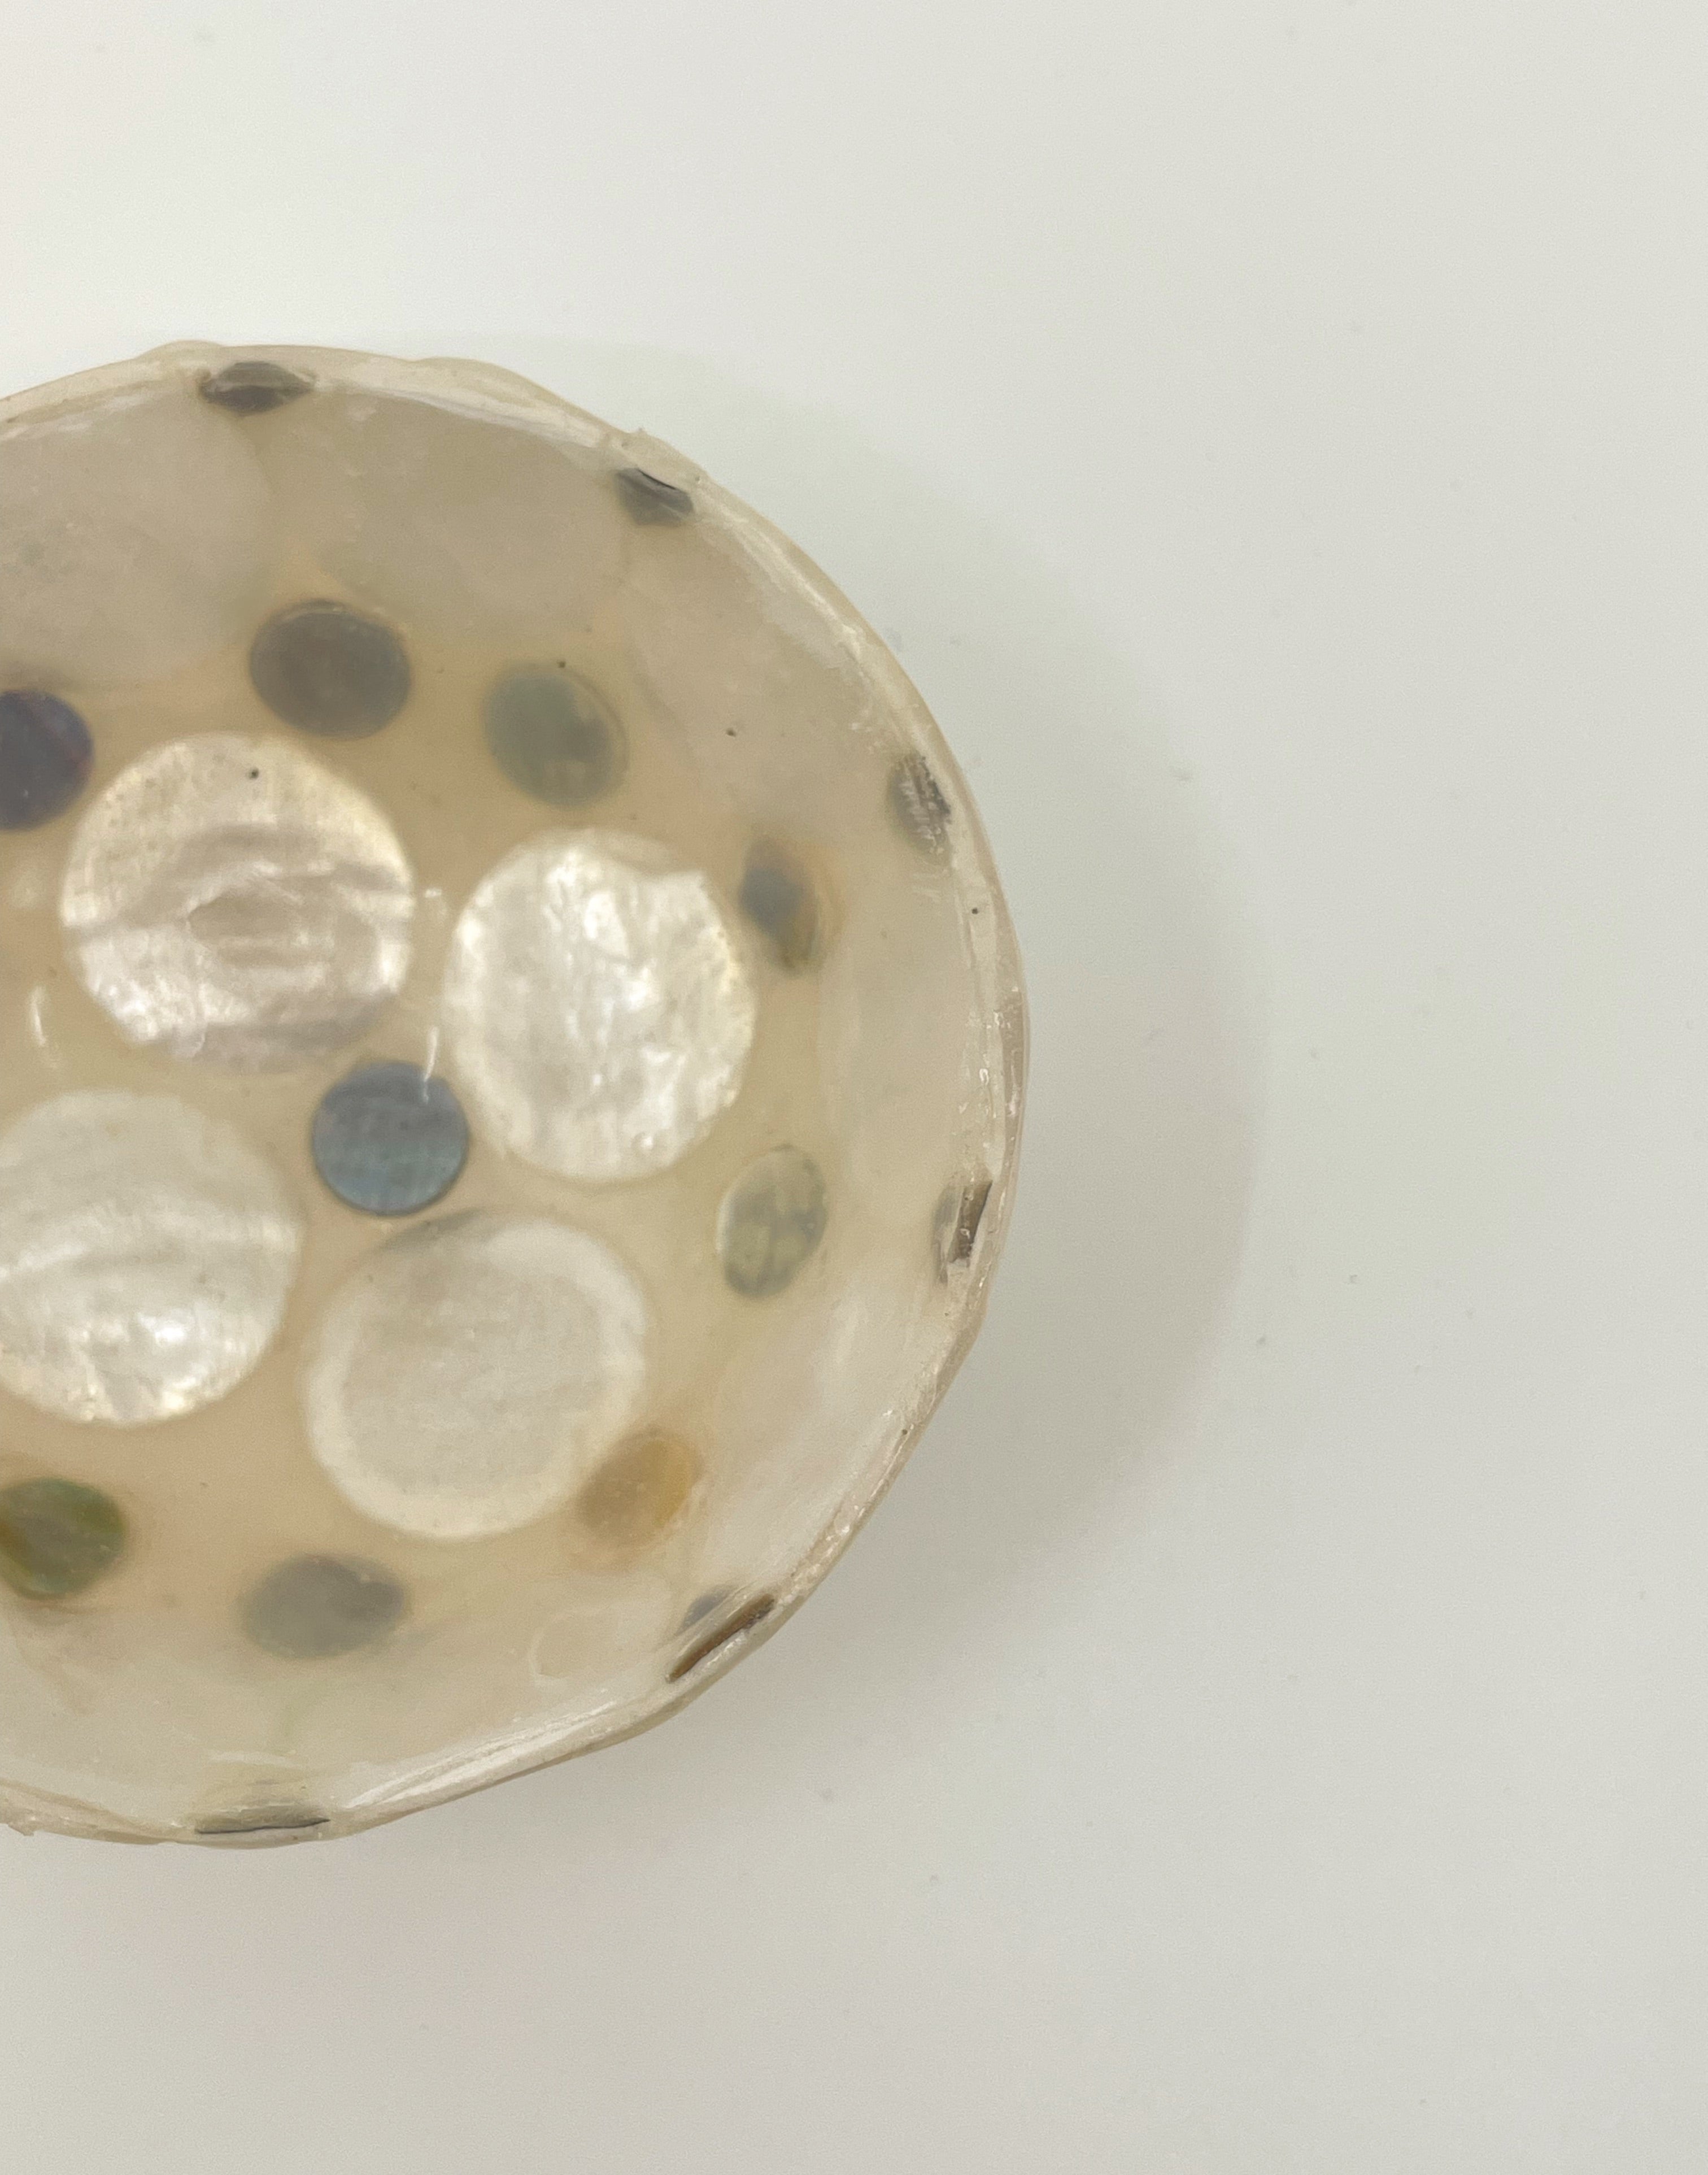 Resin bowls with Capiz shells